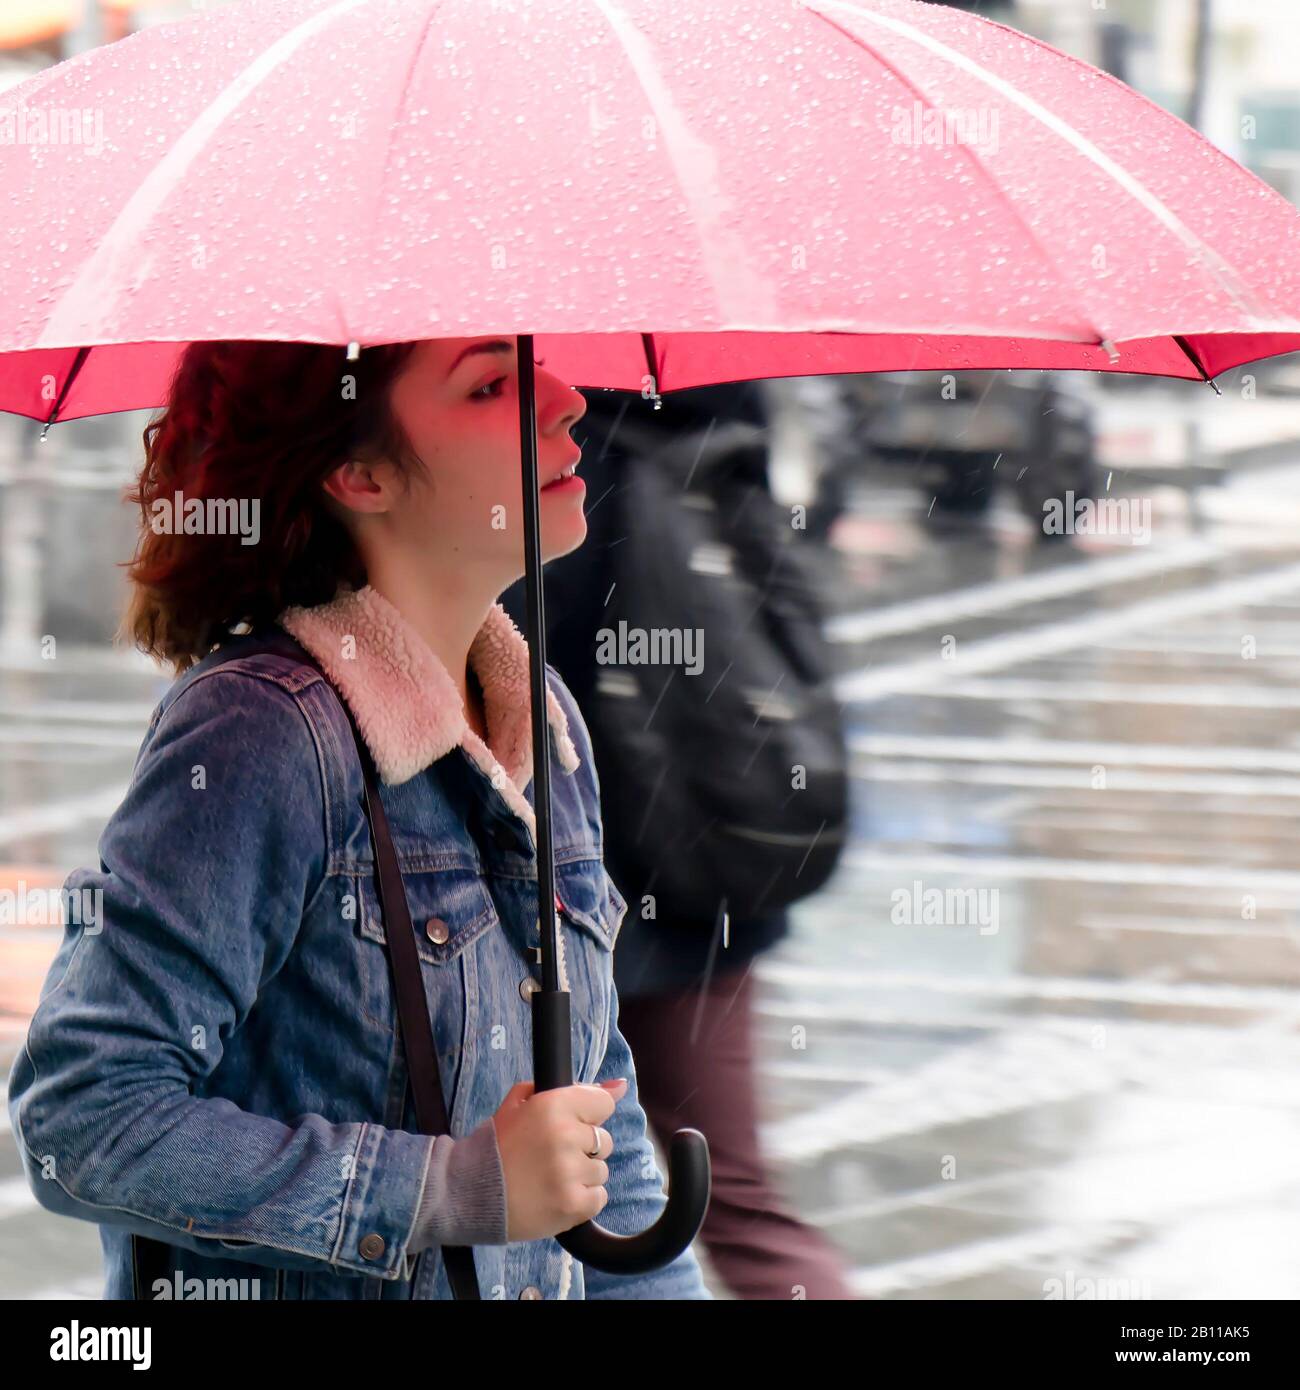 Belgrade, Serbia - September 24, 2019: One young woman in denim jacket walking under red umbrella on a rainy day Stock Photo